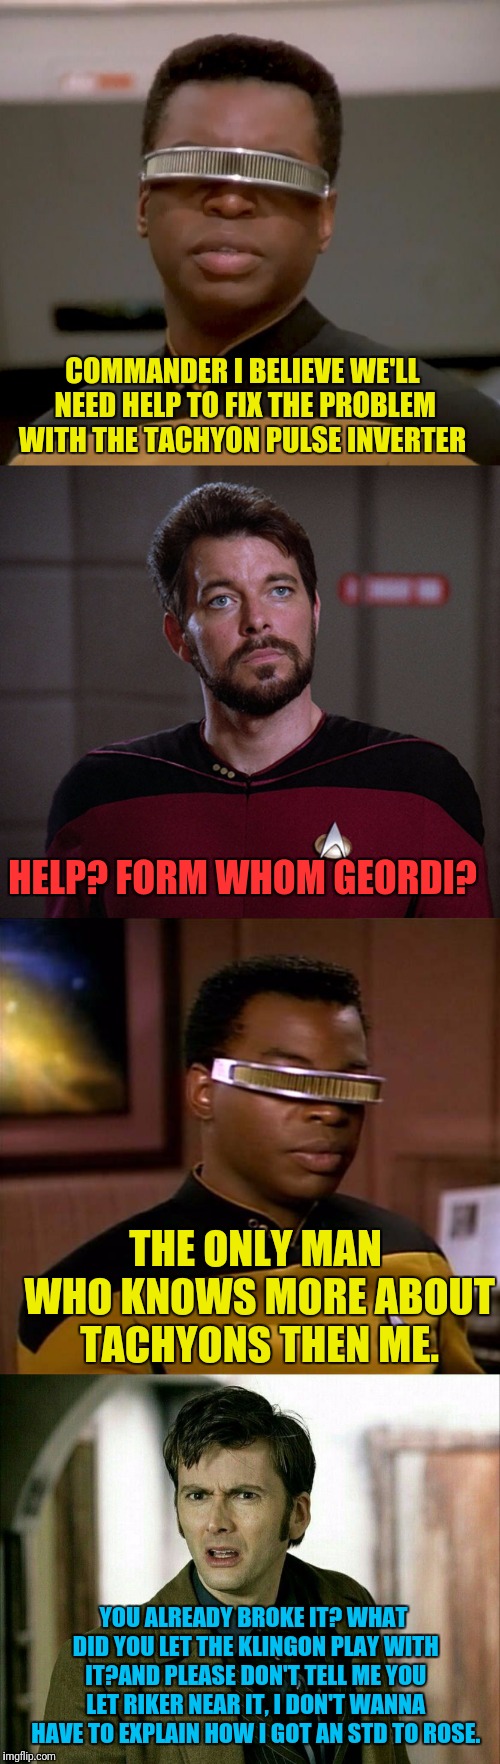 Broken Ship Call The Doctor | COMMANDER I BELIEVE WE'LL NEED HELP TO FIX THE PROBLEM WITH THE TACHYON PULSE INVERTER; HELP? FORM WHOM GEORDI? THE ONLY MAN WHO KNOWS MORE ABOUT TACHYONS THEN ME. YOU ALREADY BROKE IT? WHAT DID YOU LET THE KLINGON PLAY WITH IT?AND PLEASE DON'T TELL ME YOU LET RIKER NEAR IT, I DON'T WANNA HAVE TO EXPLAIN HOW I GOT AN STD TO ROSE. | image tagged in star trek the next generation,doctor who,riker | made w/ Imgflip meme maker